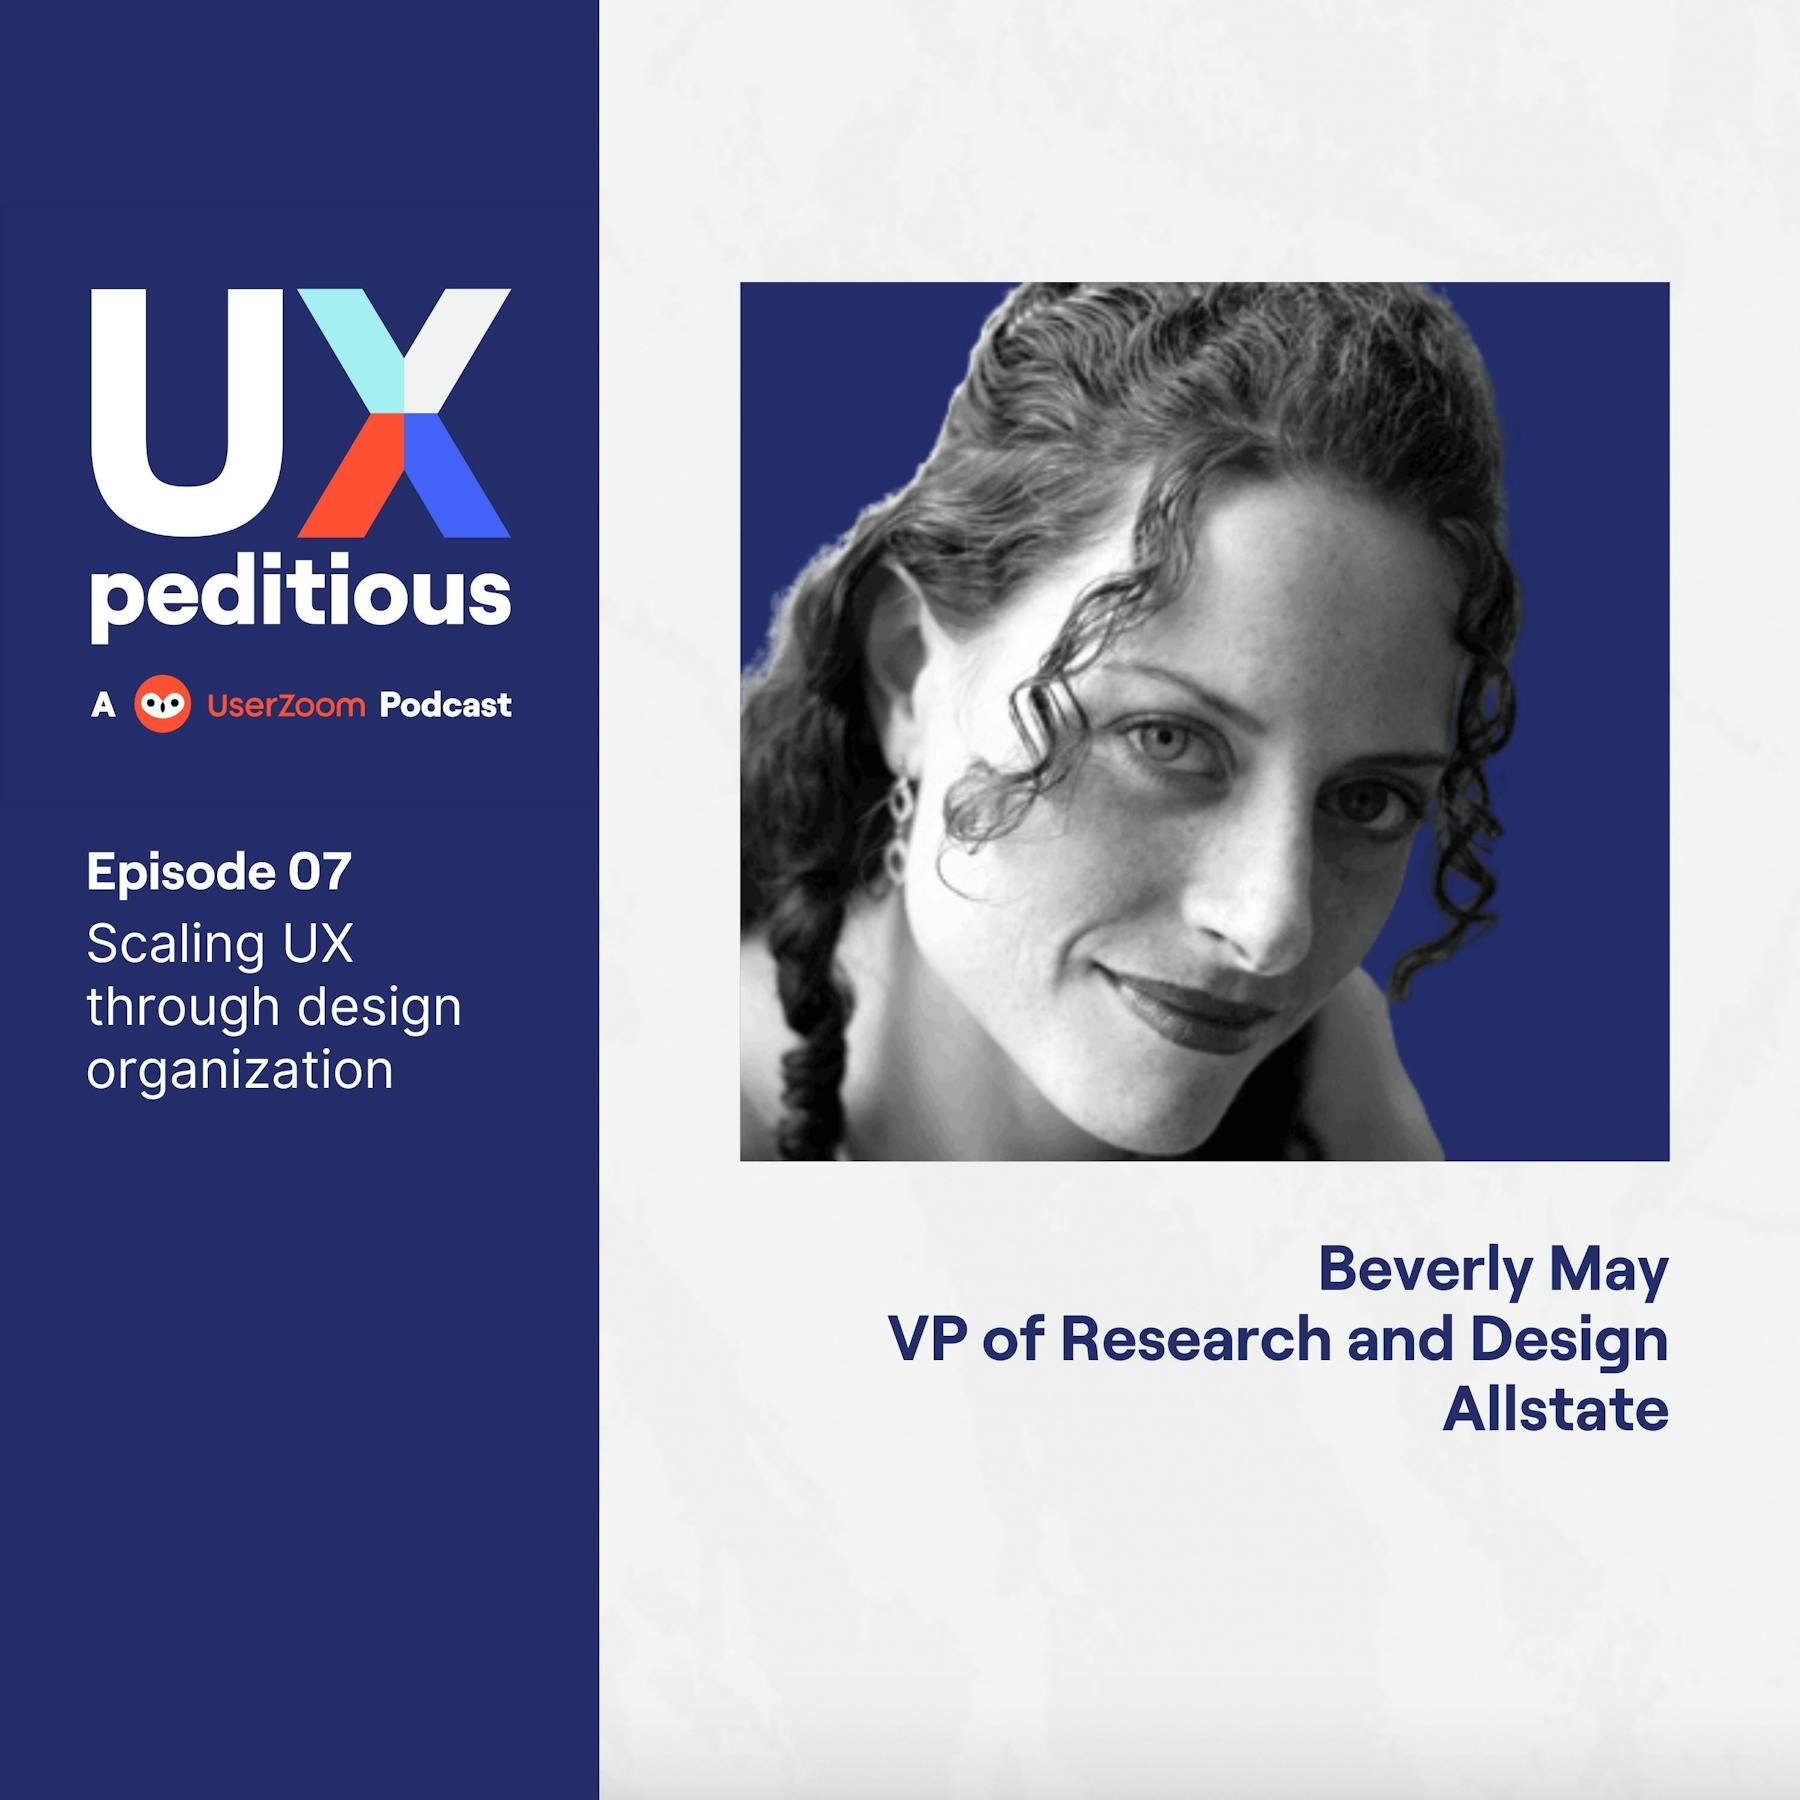 Hear how Beverly is defining customer experience and how it’s helping to deliver insights at scale.